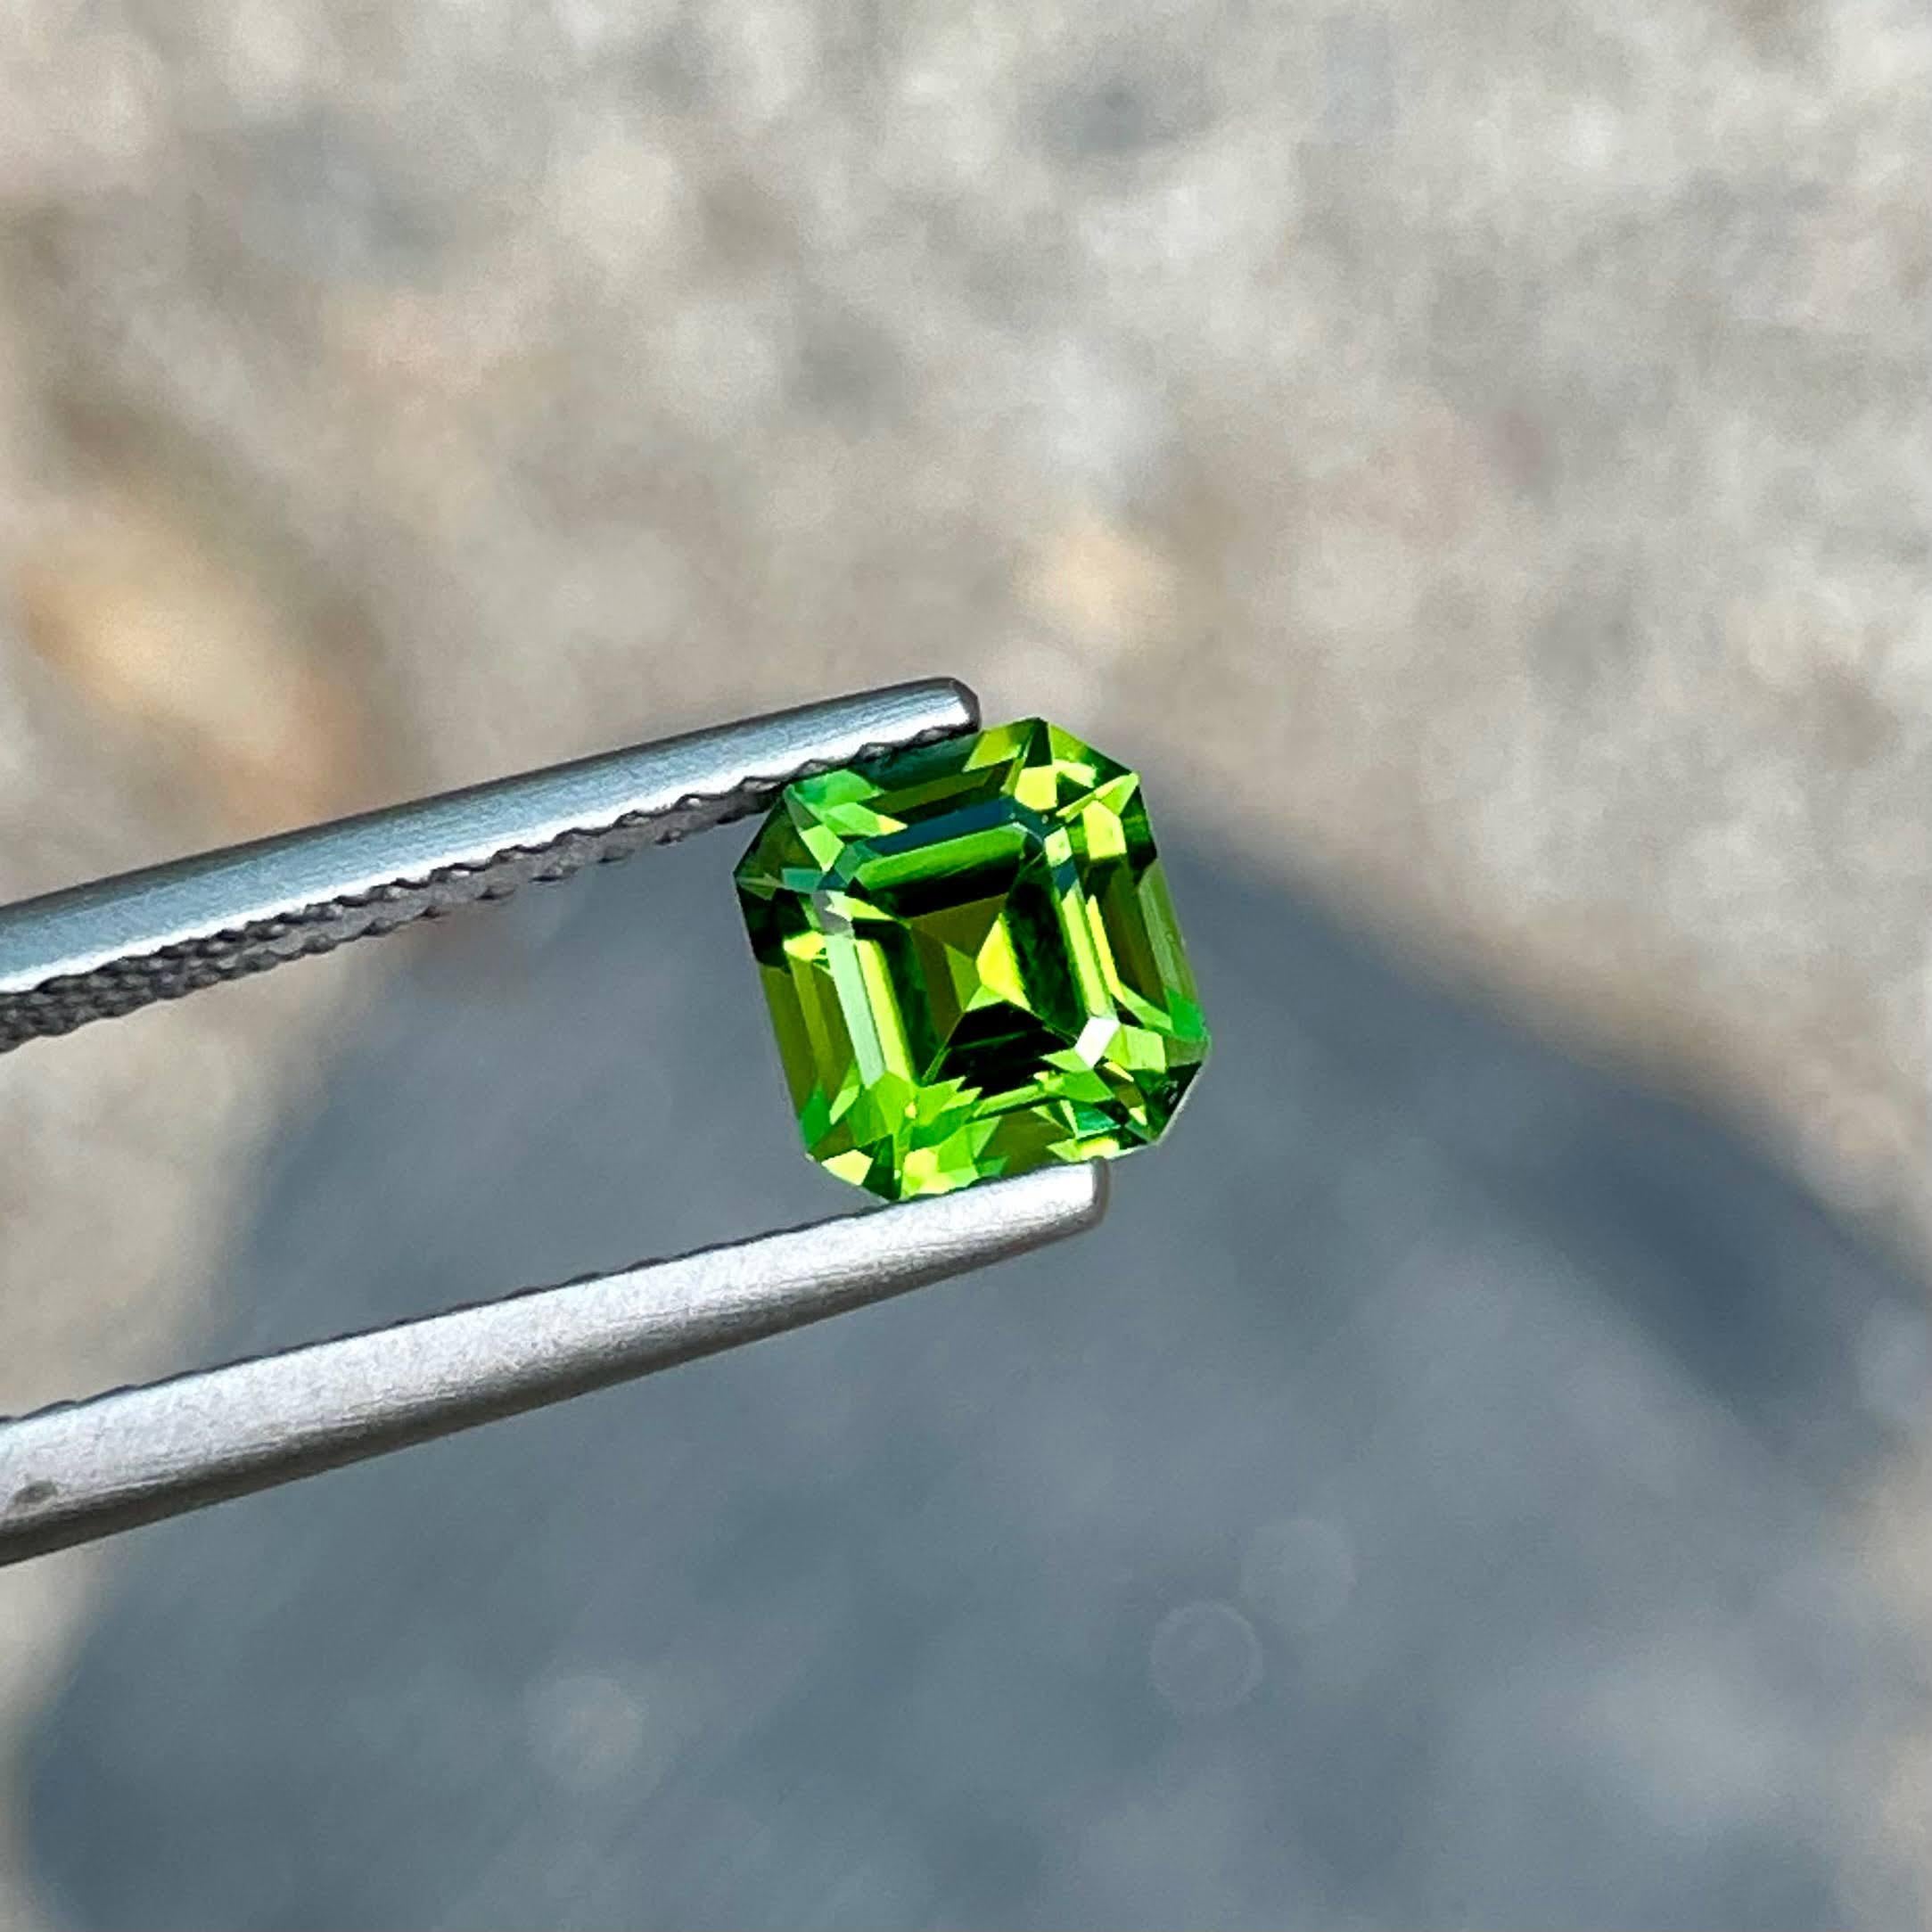 Women's or Men's 1.15 Carats Loose Green Tourmaline Stone Emerald Cut Natural Afghan Gemstone For Sale